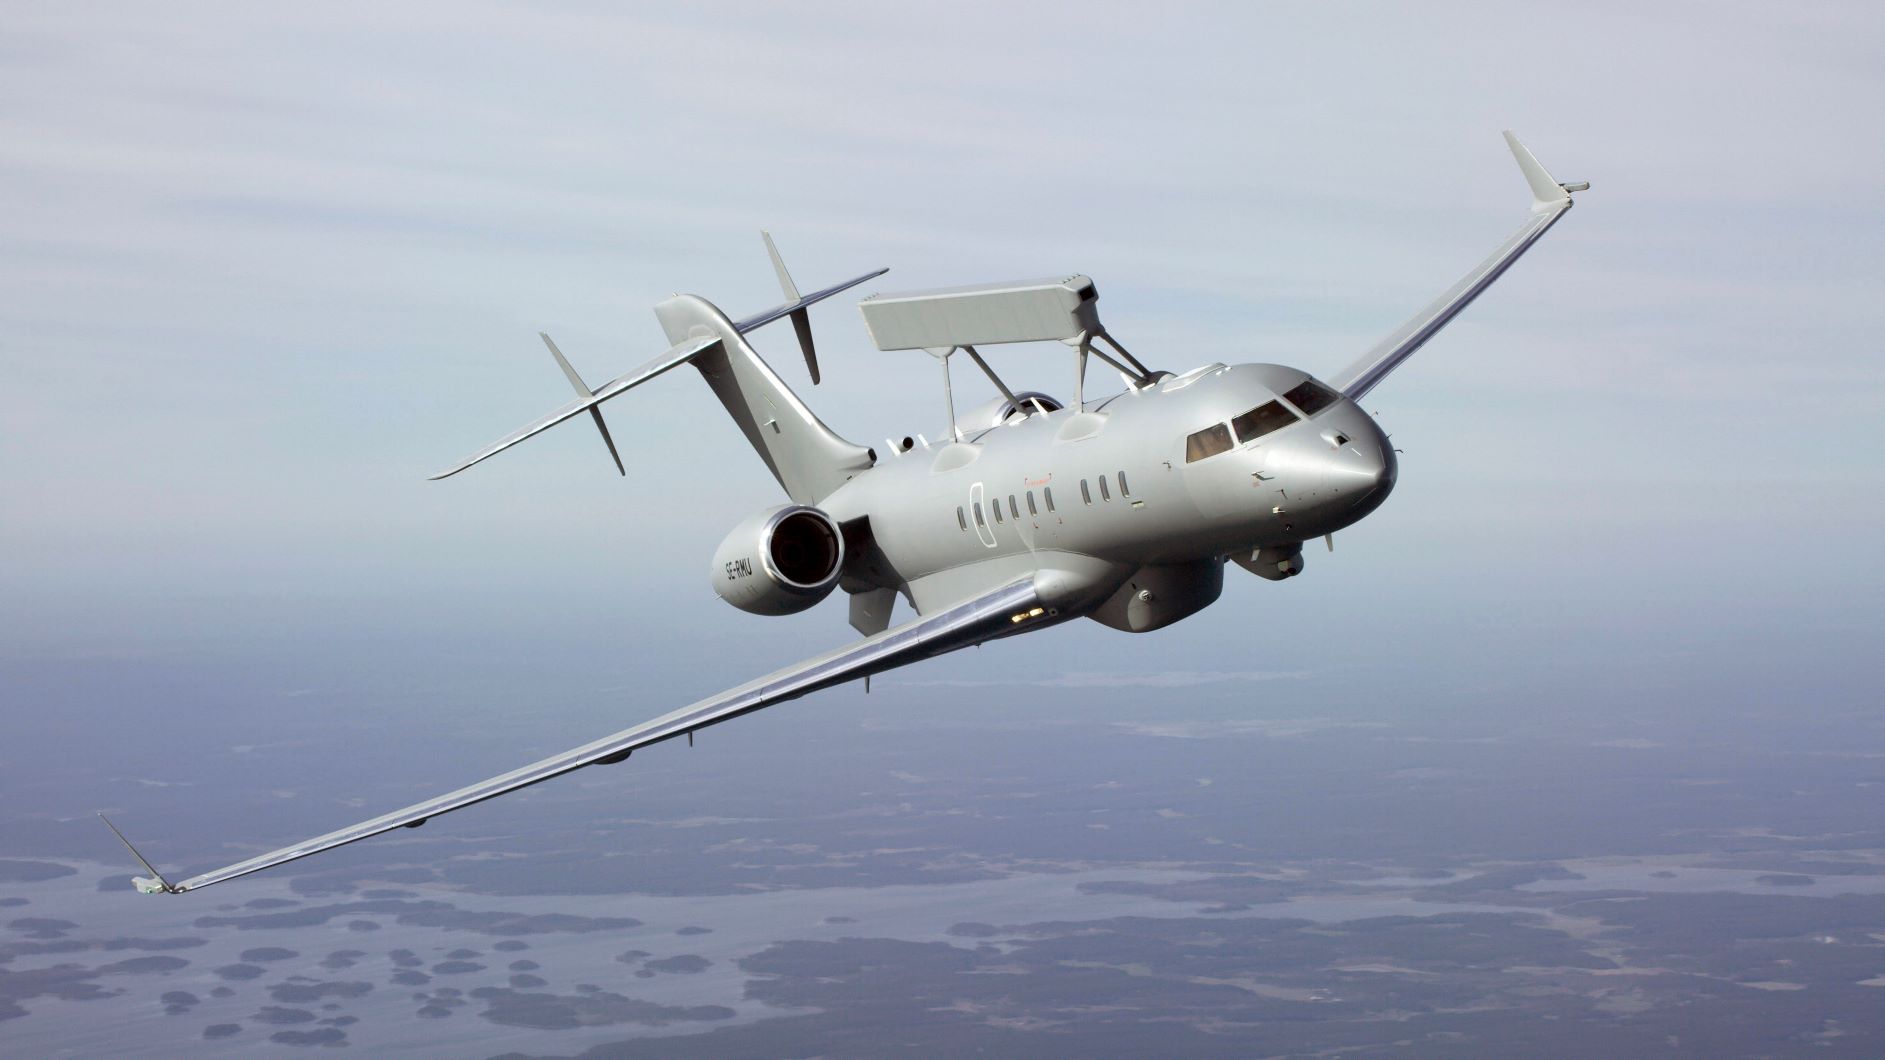 Saab pitches GlobalEye for NATO AWACS successor deal